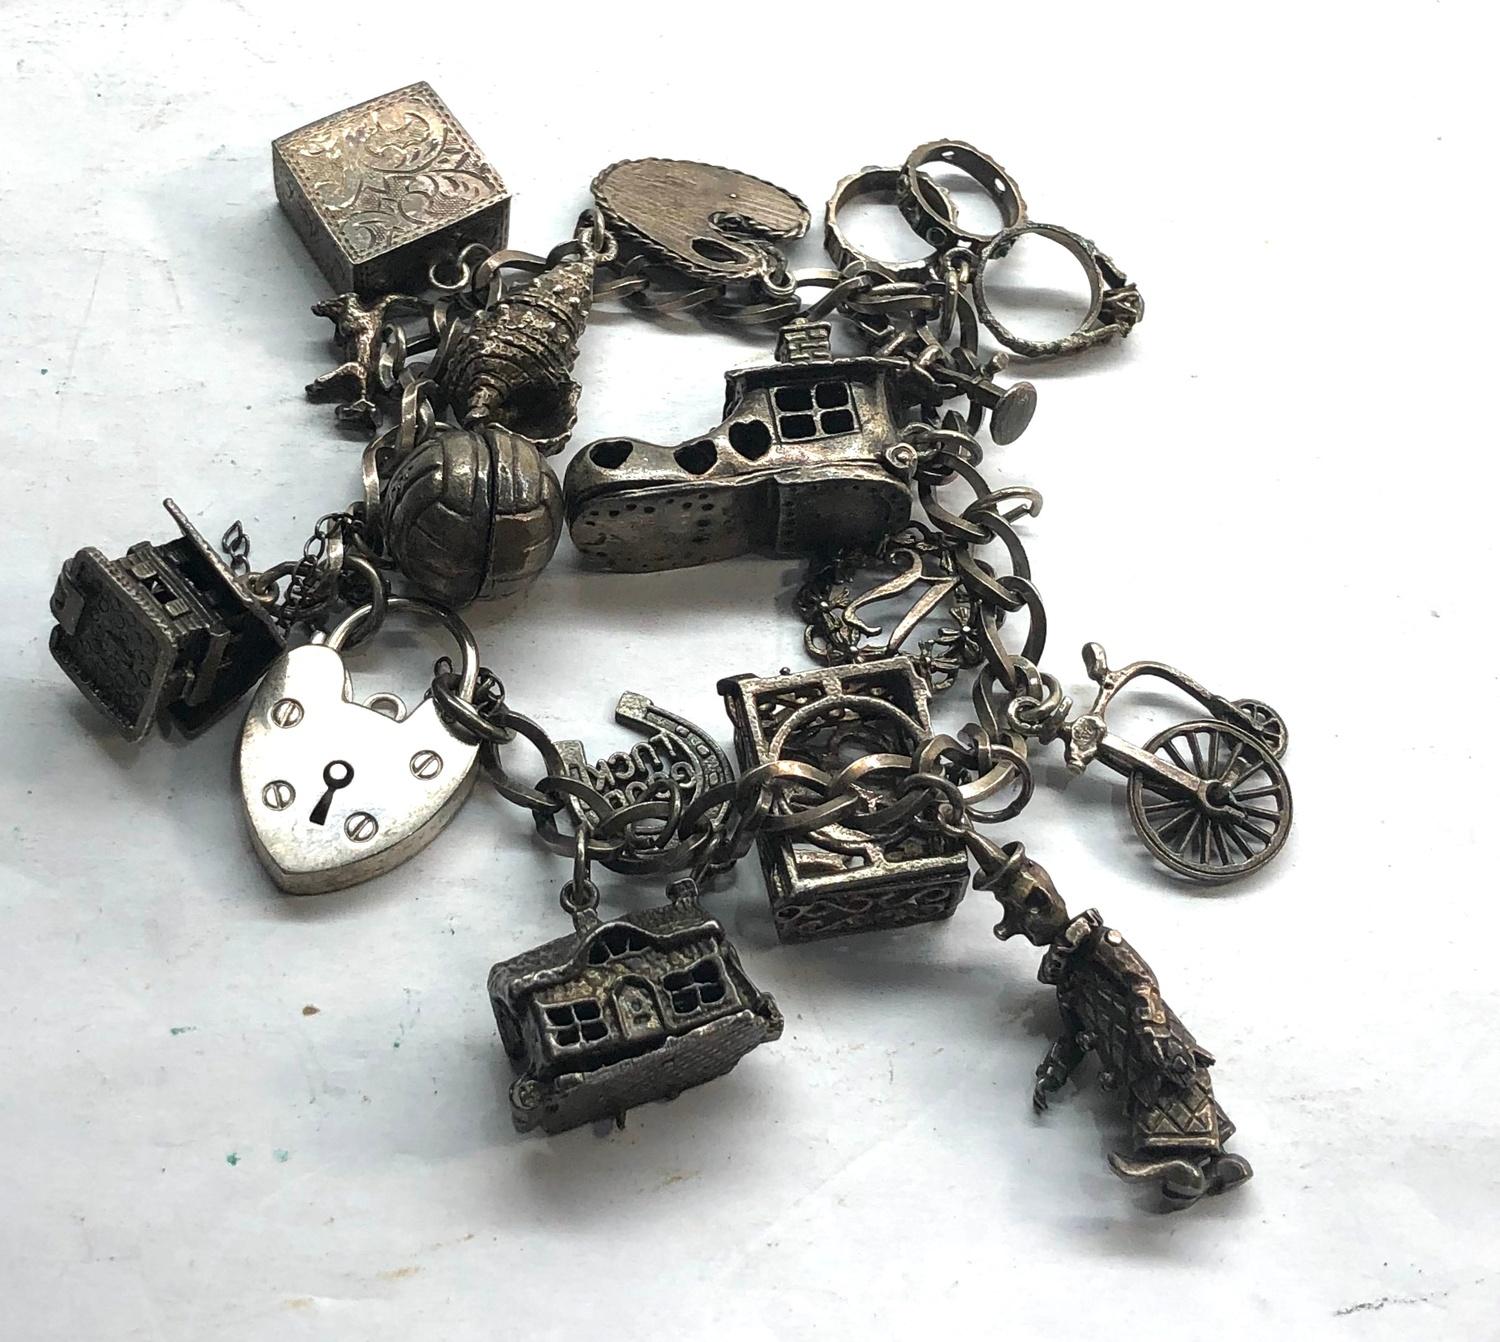 Vintage silver charm bracelet and charms weight 71g - Image 2 of 2